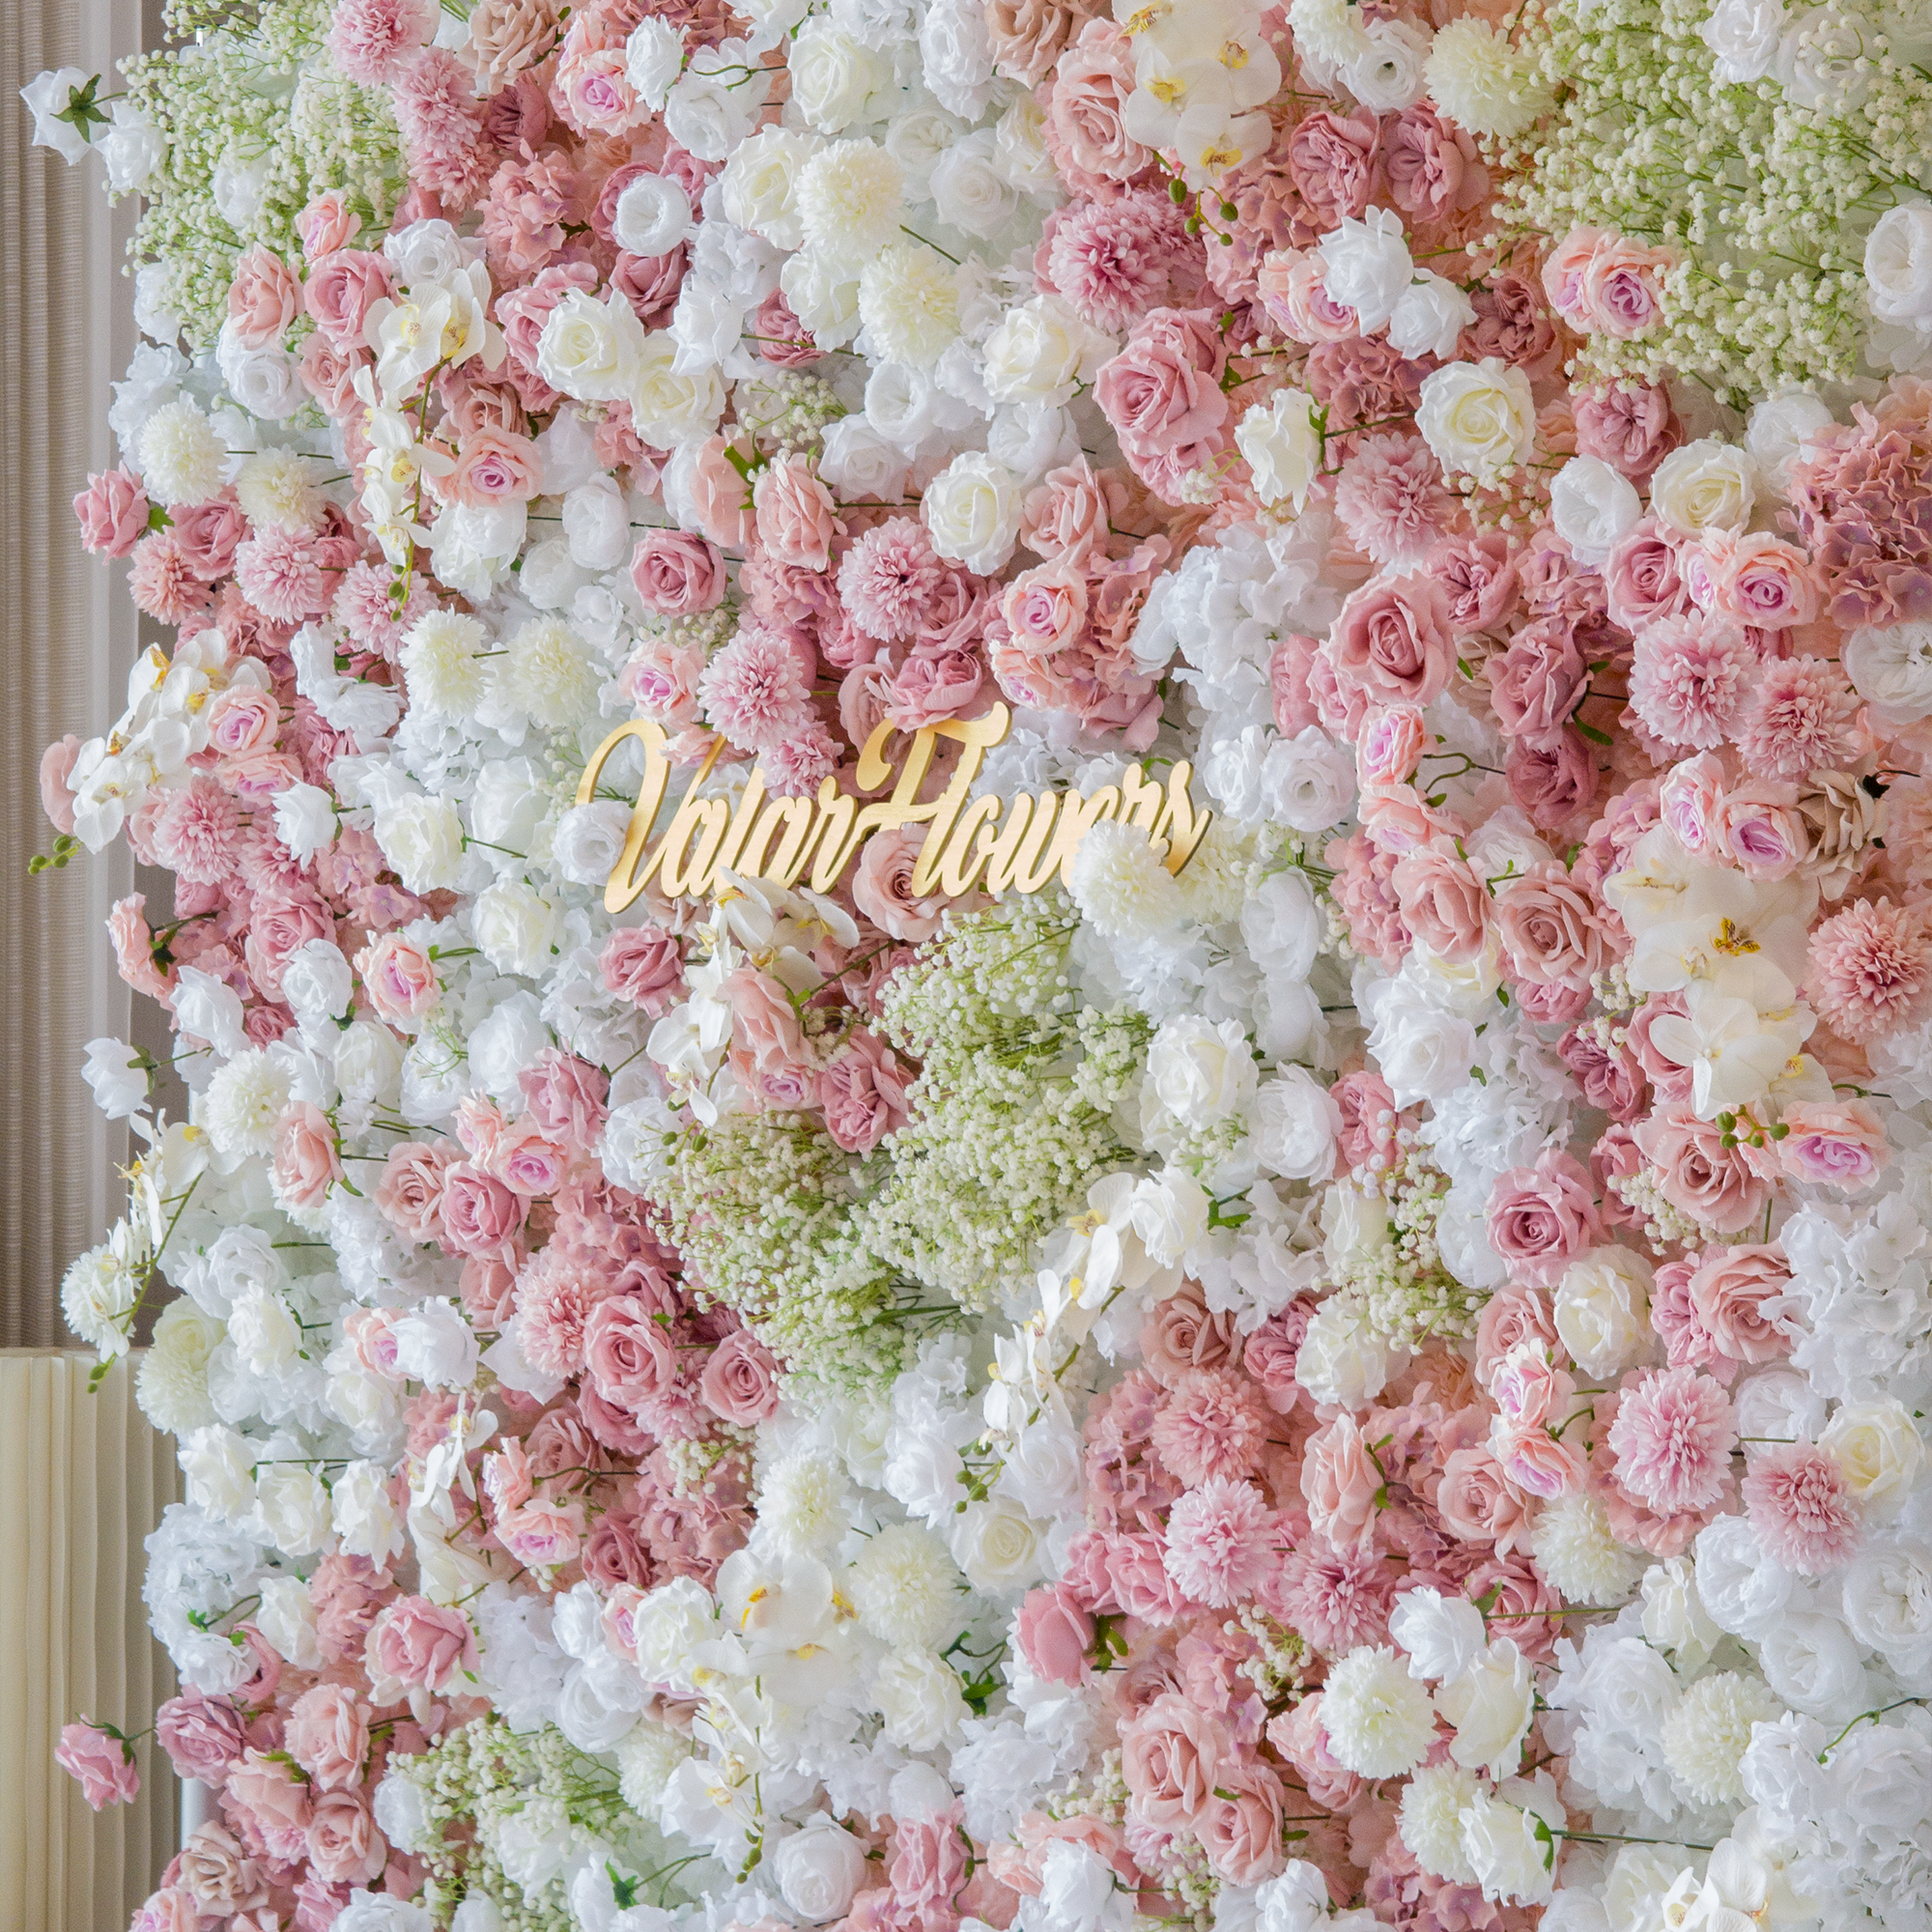 5D Roll-Up Flower Wall Backdrop for Wedding & Party Celebration Decor